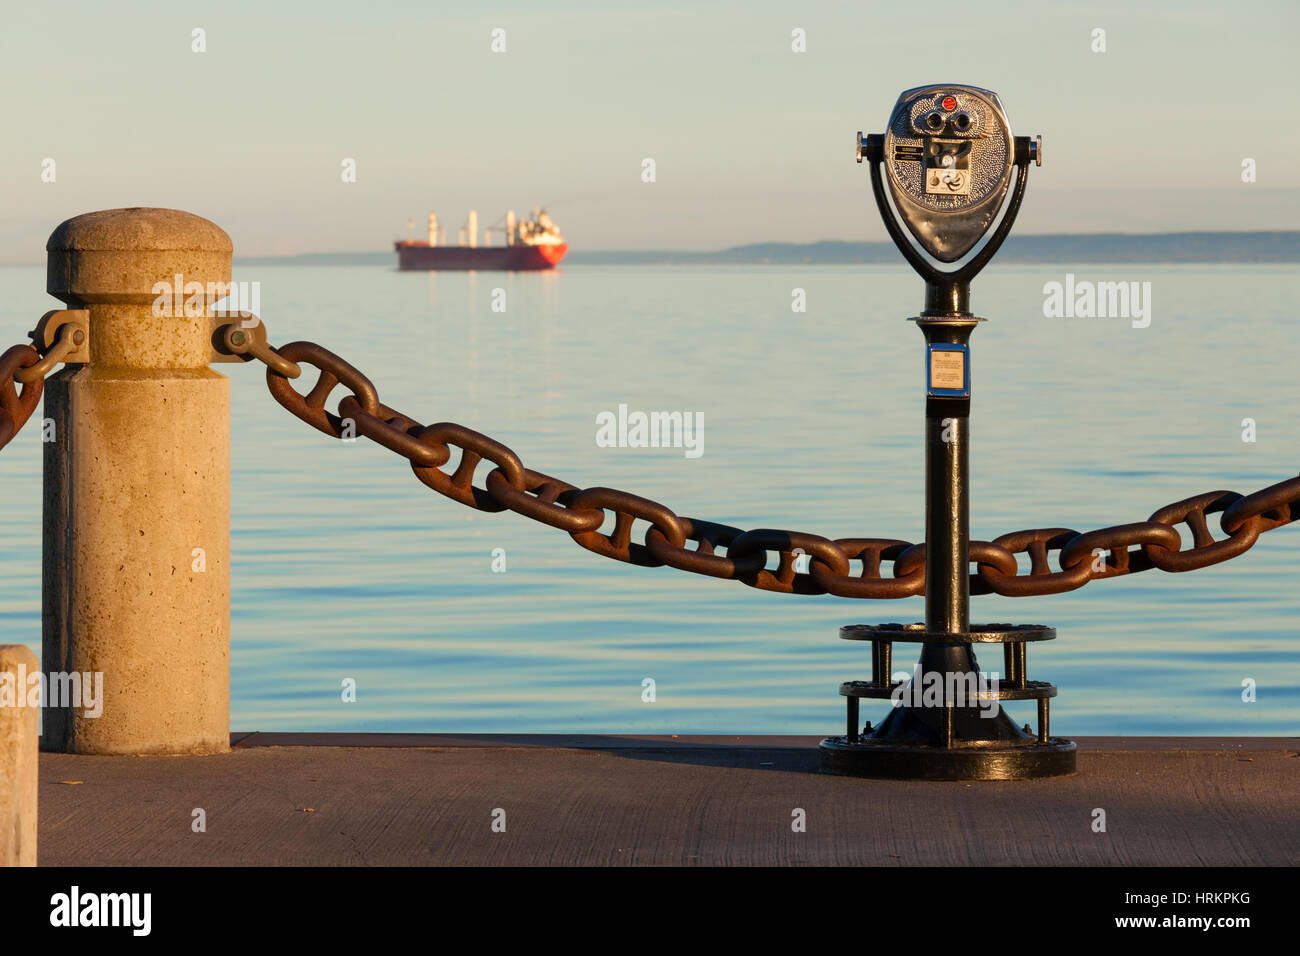 A tower viewer with a cargo ship (freighter) in the distance.  Spencer Smith Park, Burlington, Ontario, Canada. Stock Photo